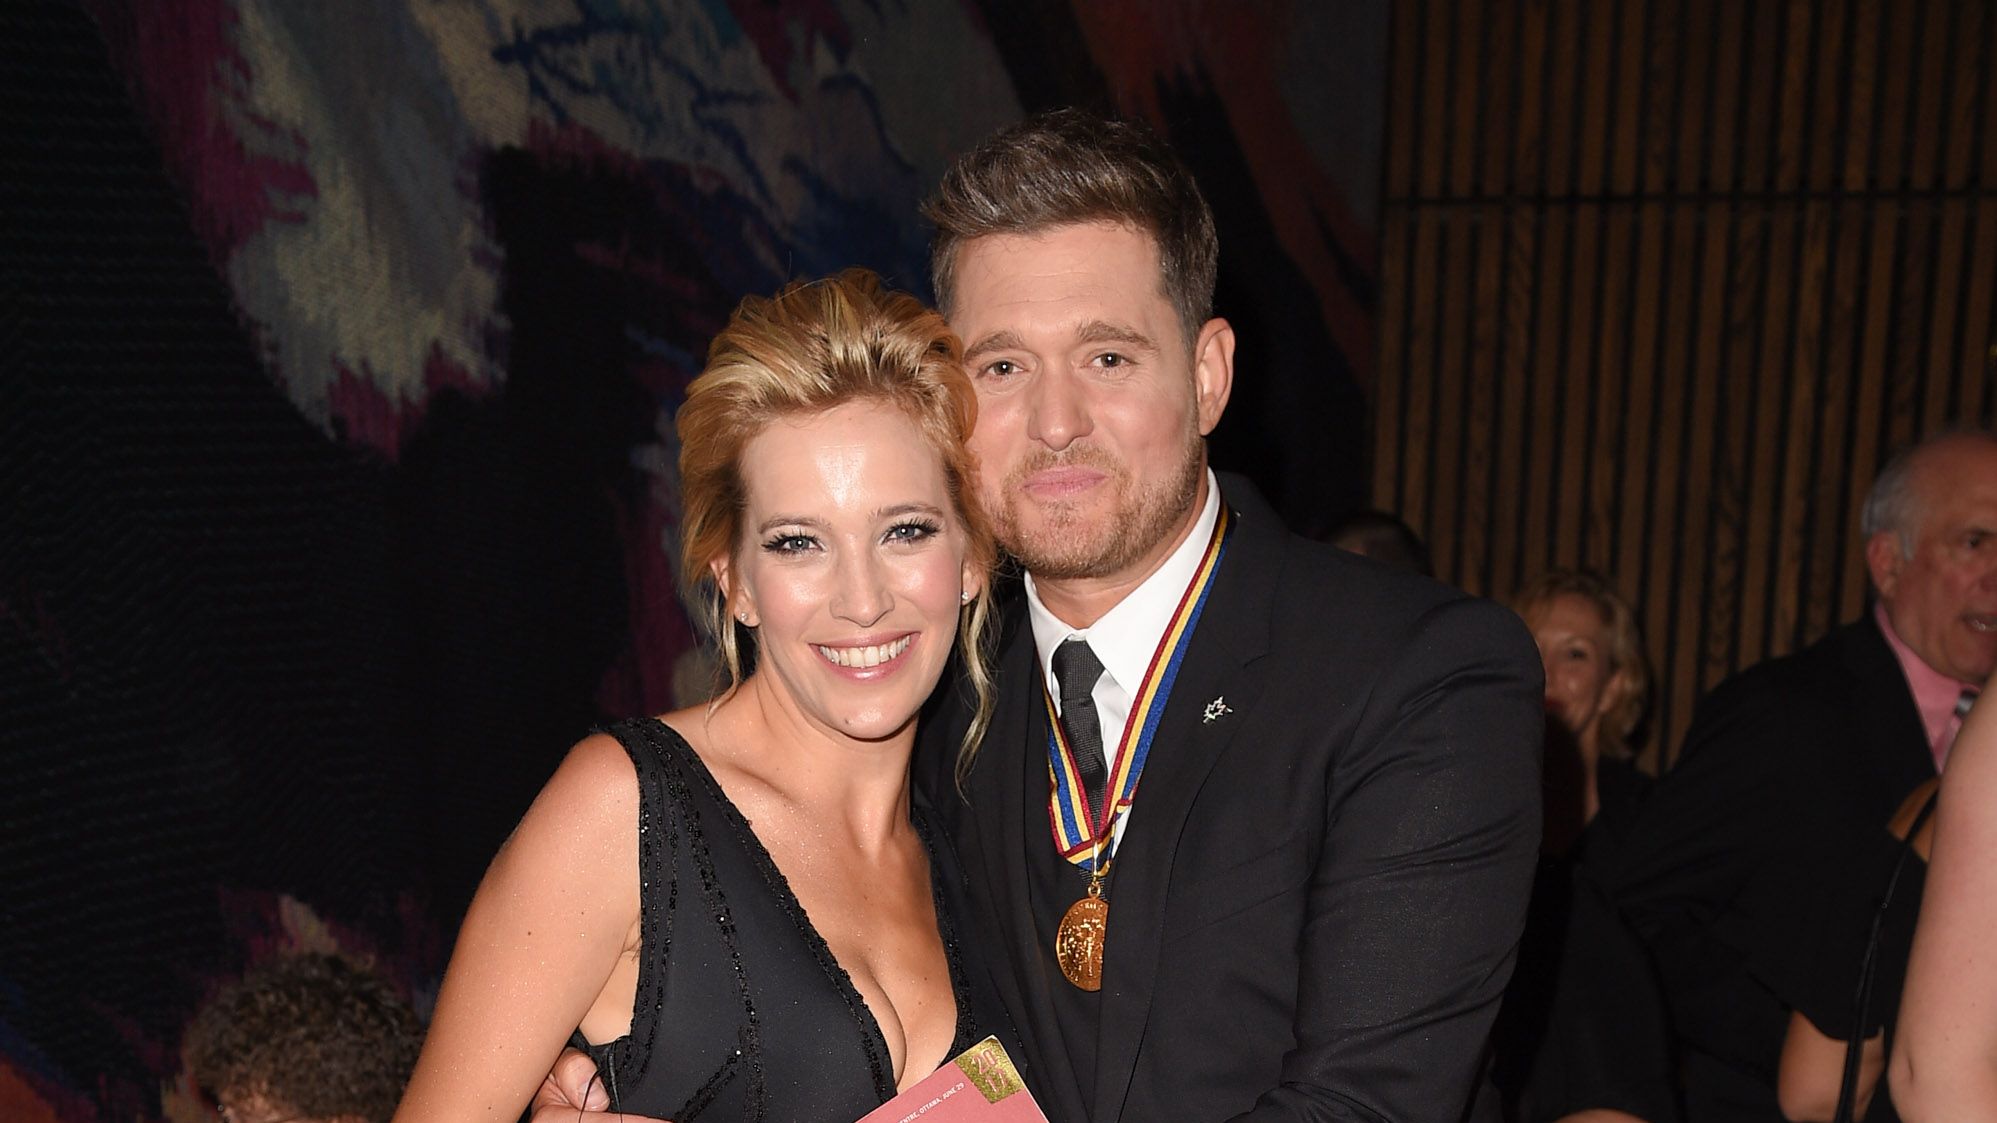 Luisana Lopilato and Michael Buble attend the Governor General's Awards 25th Anniversary Gala